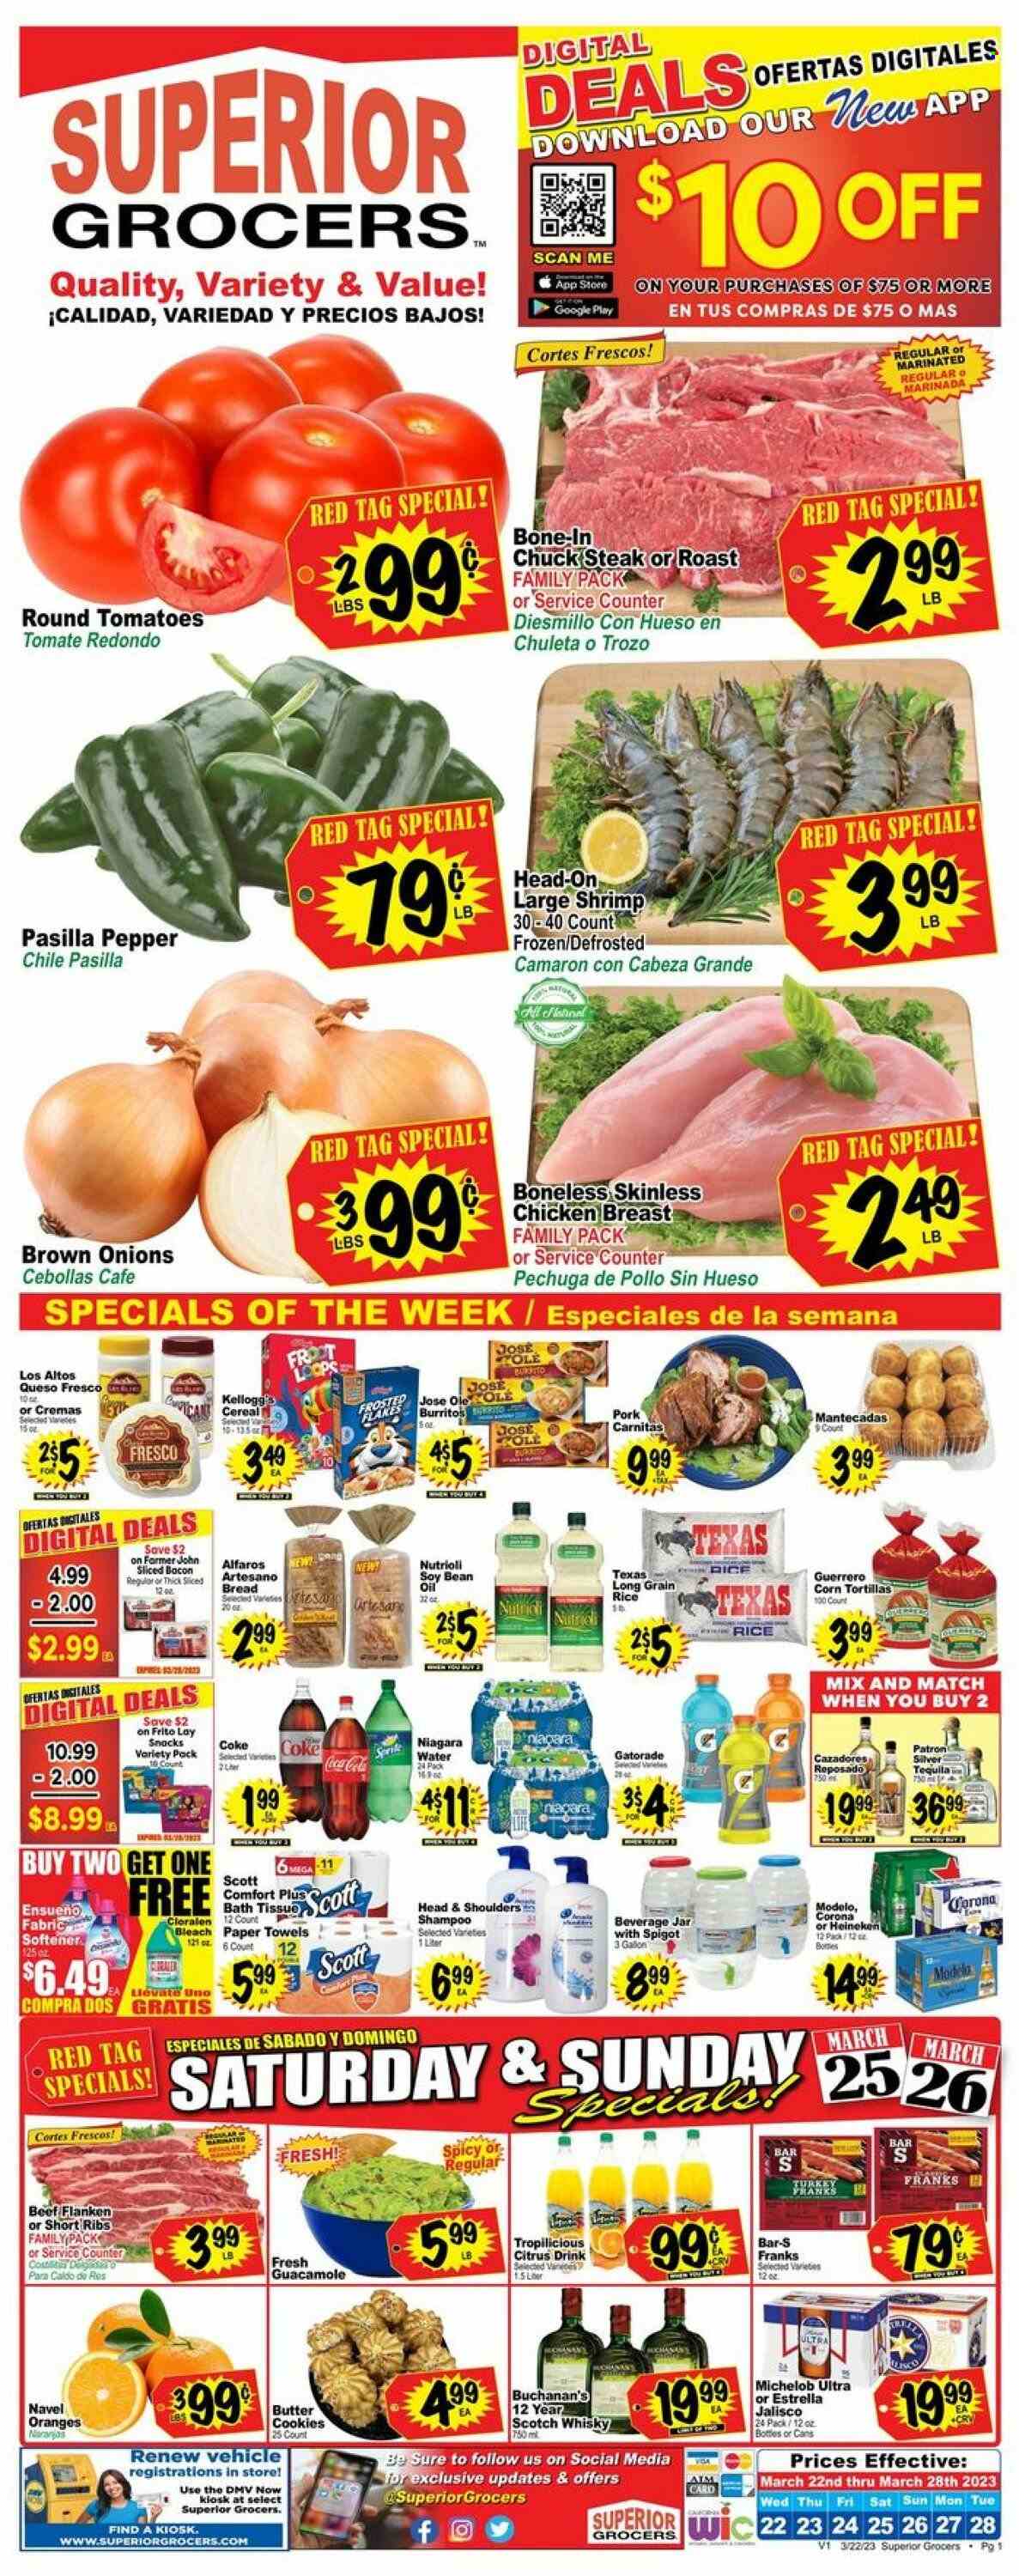 thumbnail - Superior Grocers Flyer - 03/22/2023 - 03/28/2023 - Sales products - bread, corn tortillas, tortillas, tomatoes, onion, oranges, chicken breasts, chicken, beef meat, beef ribs, steak, chuck steak, ribs, roast, shrimps, burrito, guacamole, queso fresco, cookies, butter cookies, snack, Kellogg's, cereals, rice, long grain rice, soya oil, oil, Coca-Cola, Sprite, Gatorade, Coke, water, tequila, scotch whisky, whisky, beer, Corona Extra, Heineken, Modelo, Estrella, fabric softener, bleach, Head & Shoulders, jar, Michelob, pasilla, navel oranges. Page 1.